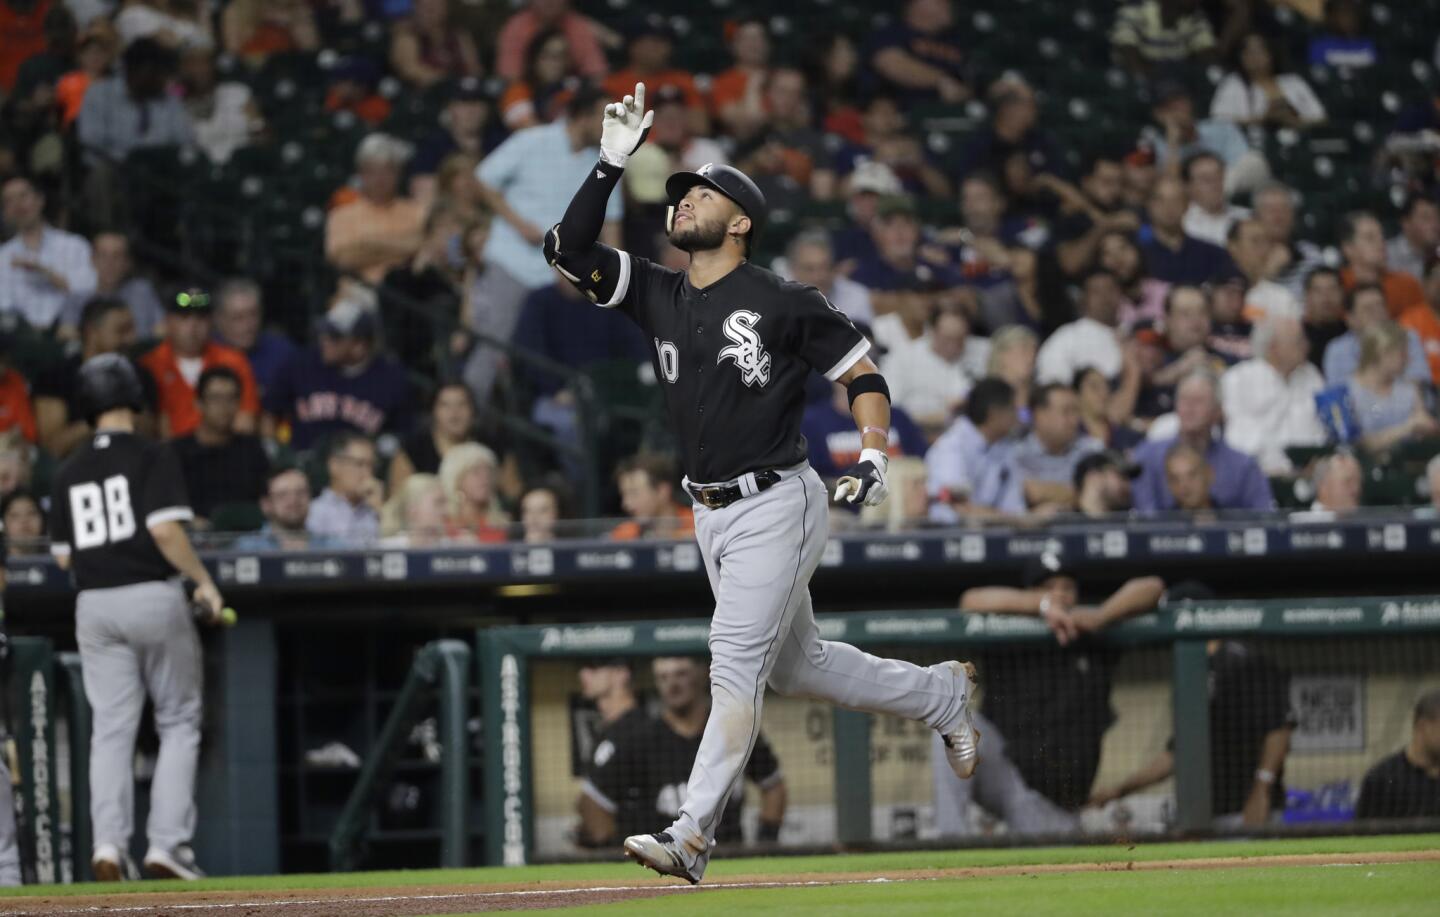 The White Sox's Yoan Moncada gestures after hitting a two-run home run against the Astros during the fourth inning Wednesday, Sept. 20, 2017, in Houston.